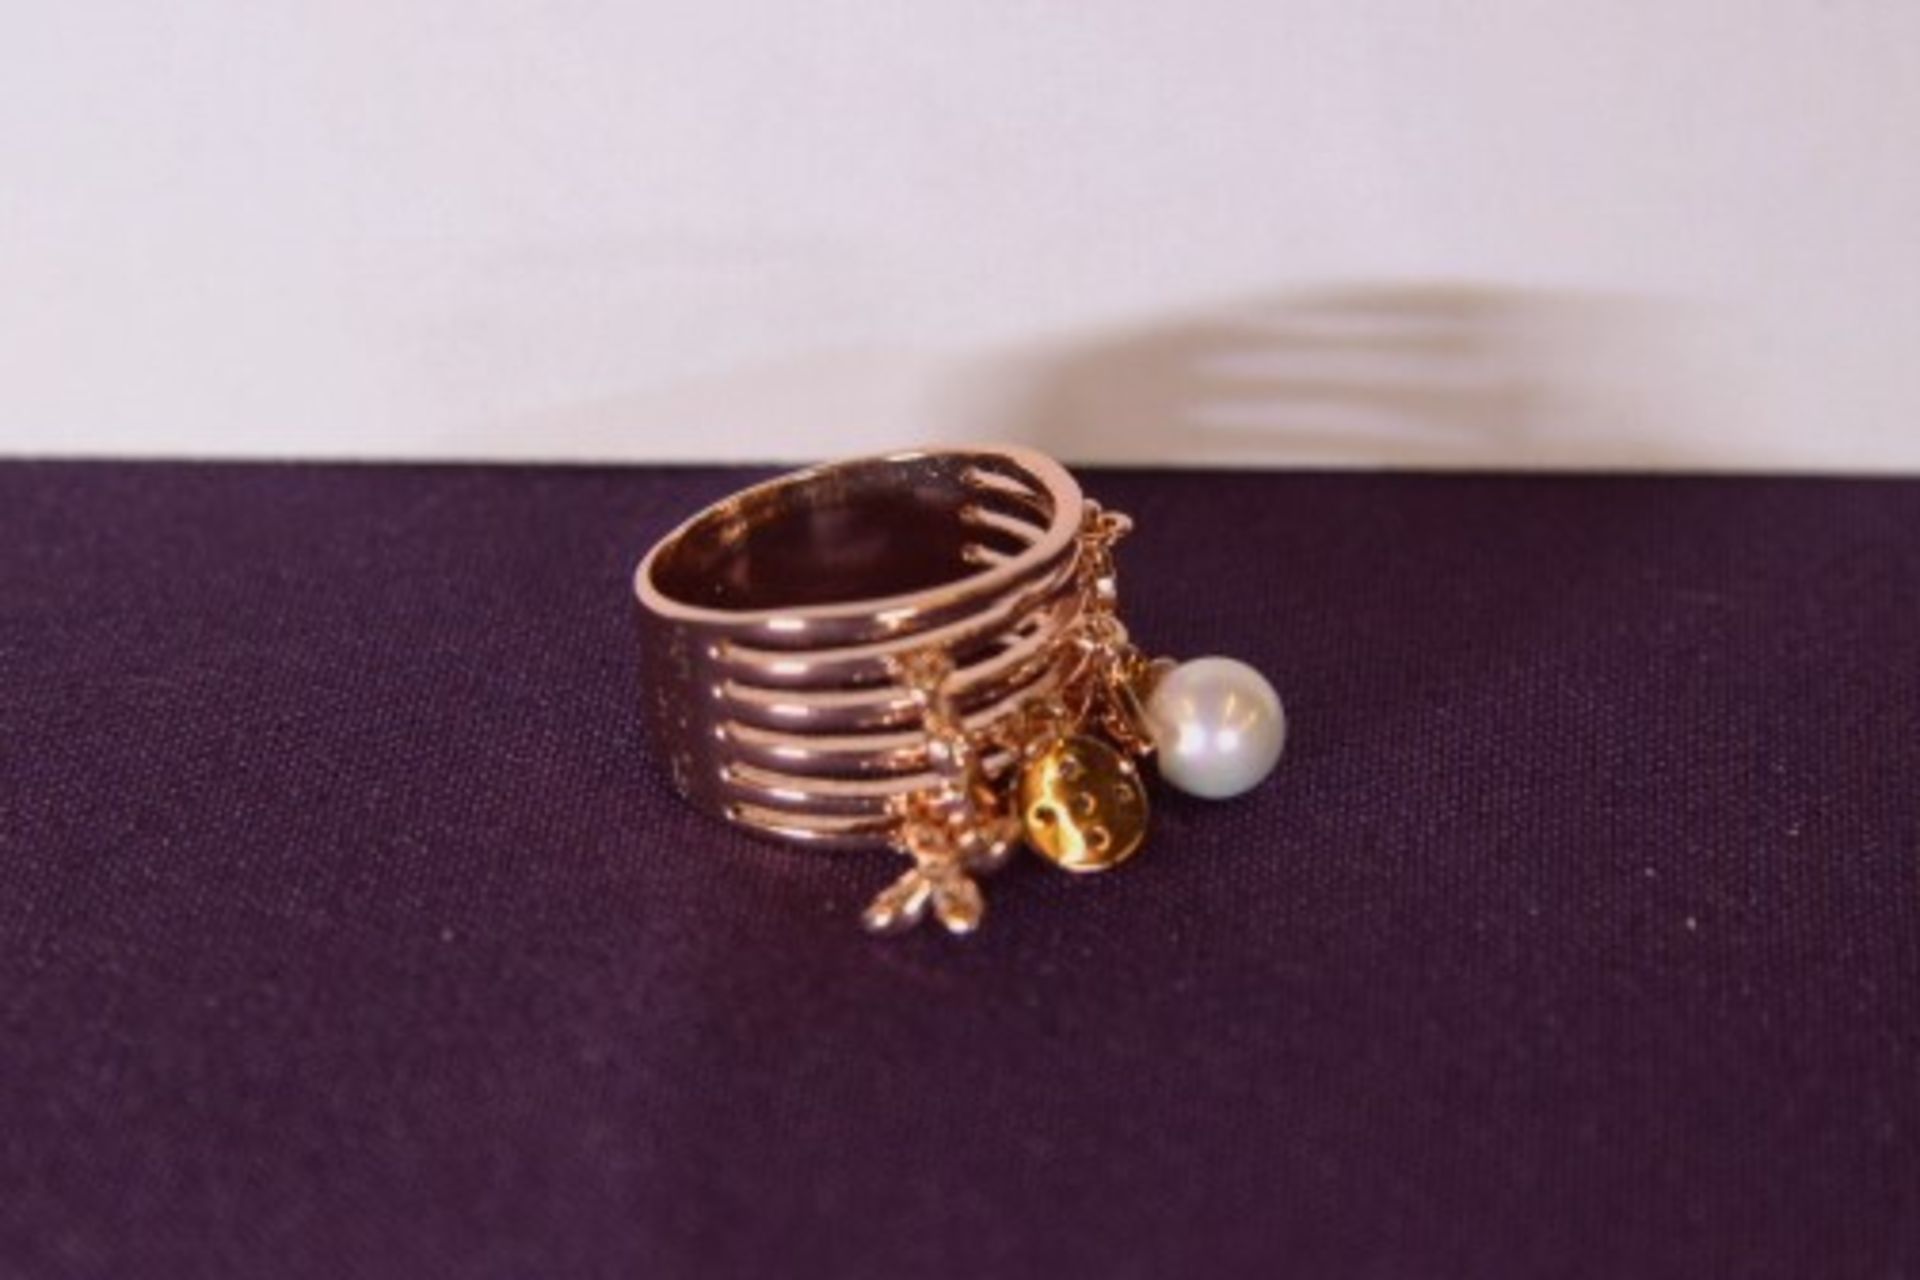 V Brand New Rose Colour Multi Layer Charm Ring X 2 YOUR BID PRICE TO BE MULTIPLIED BY TWO